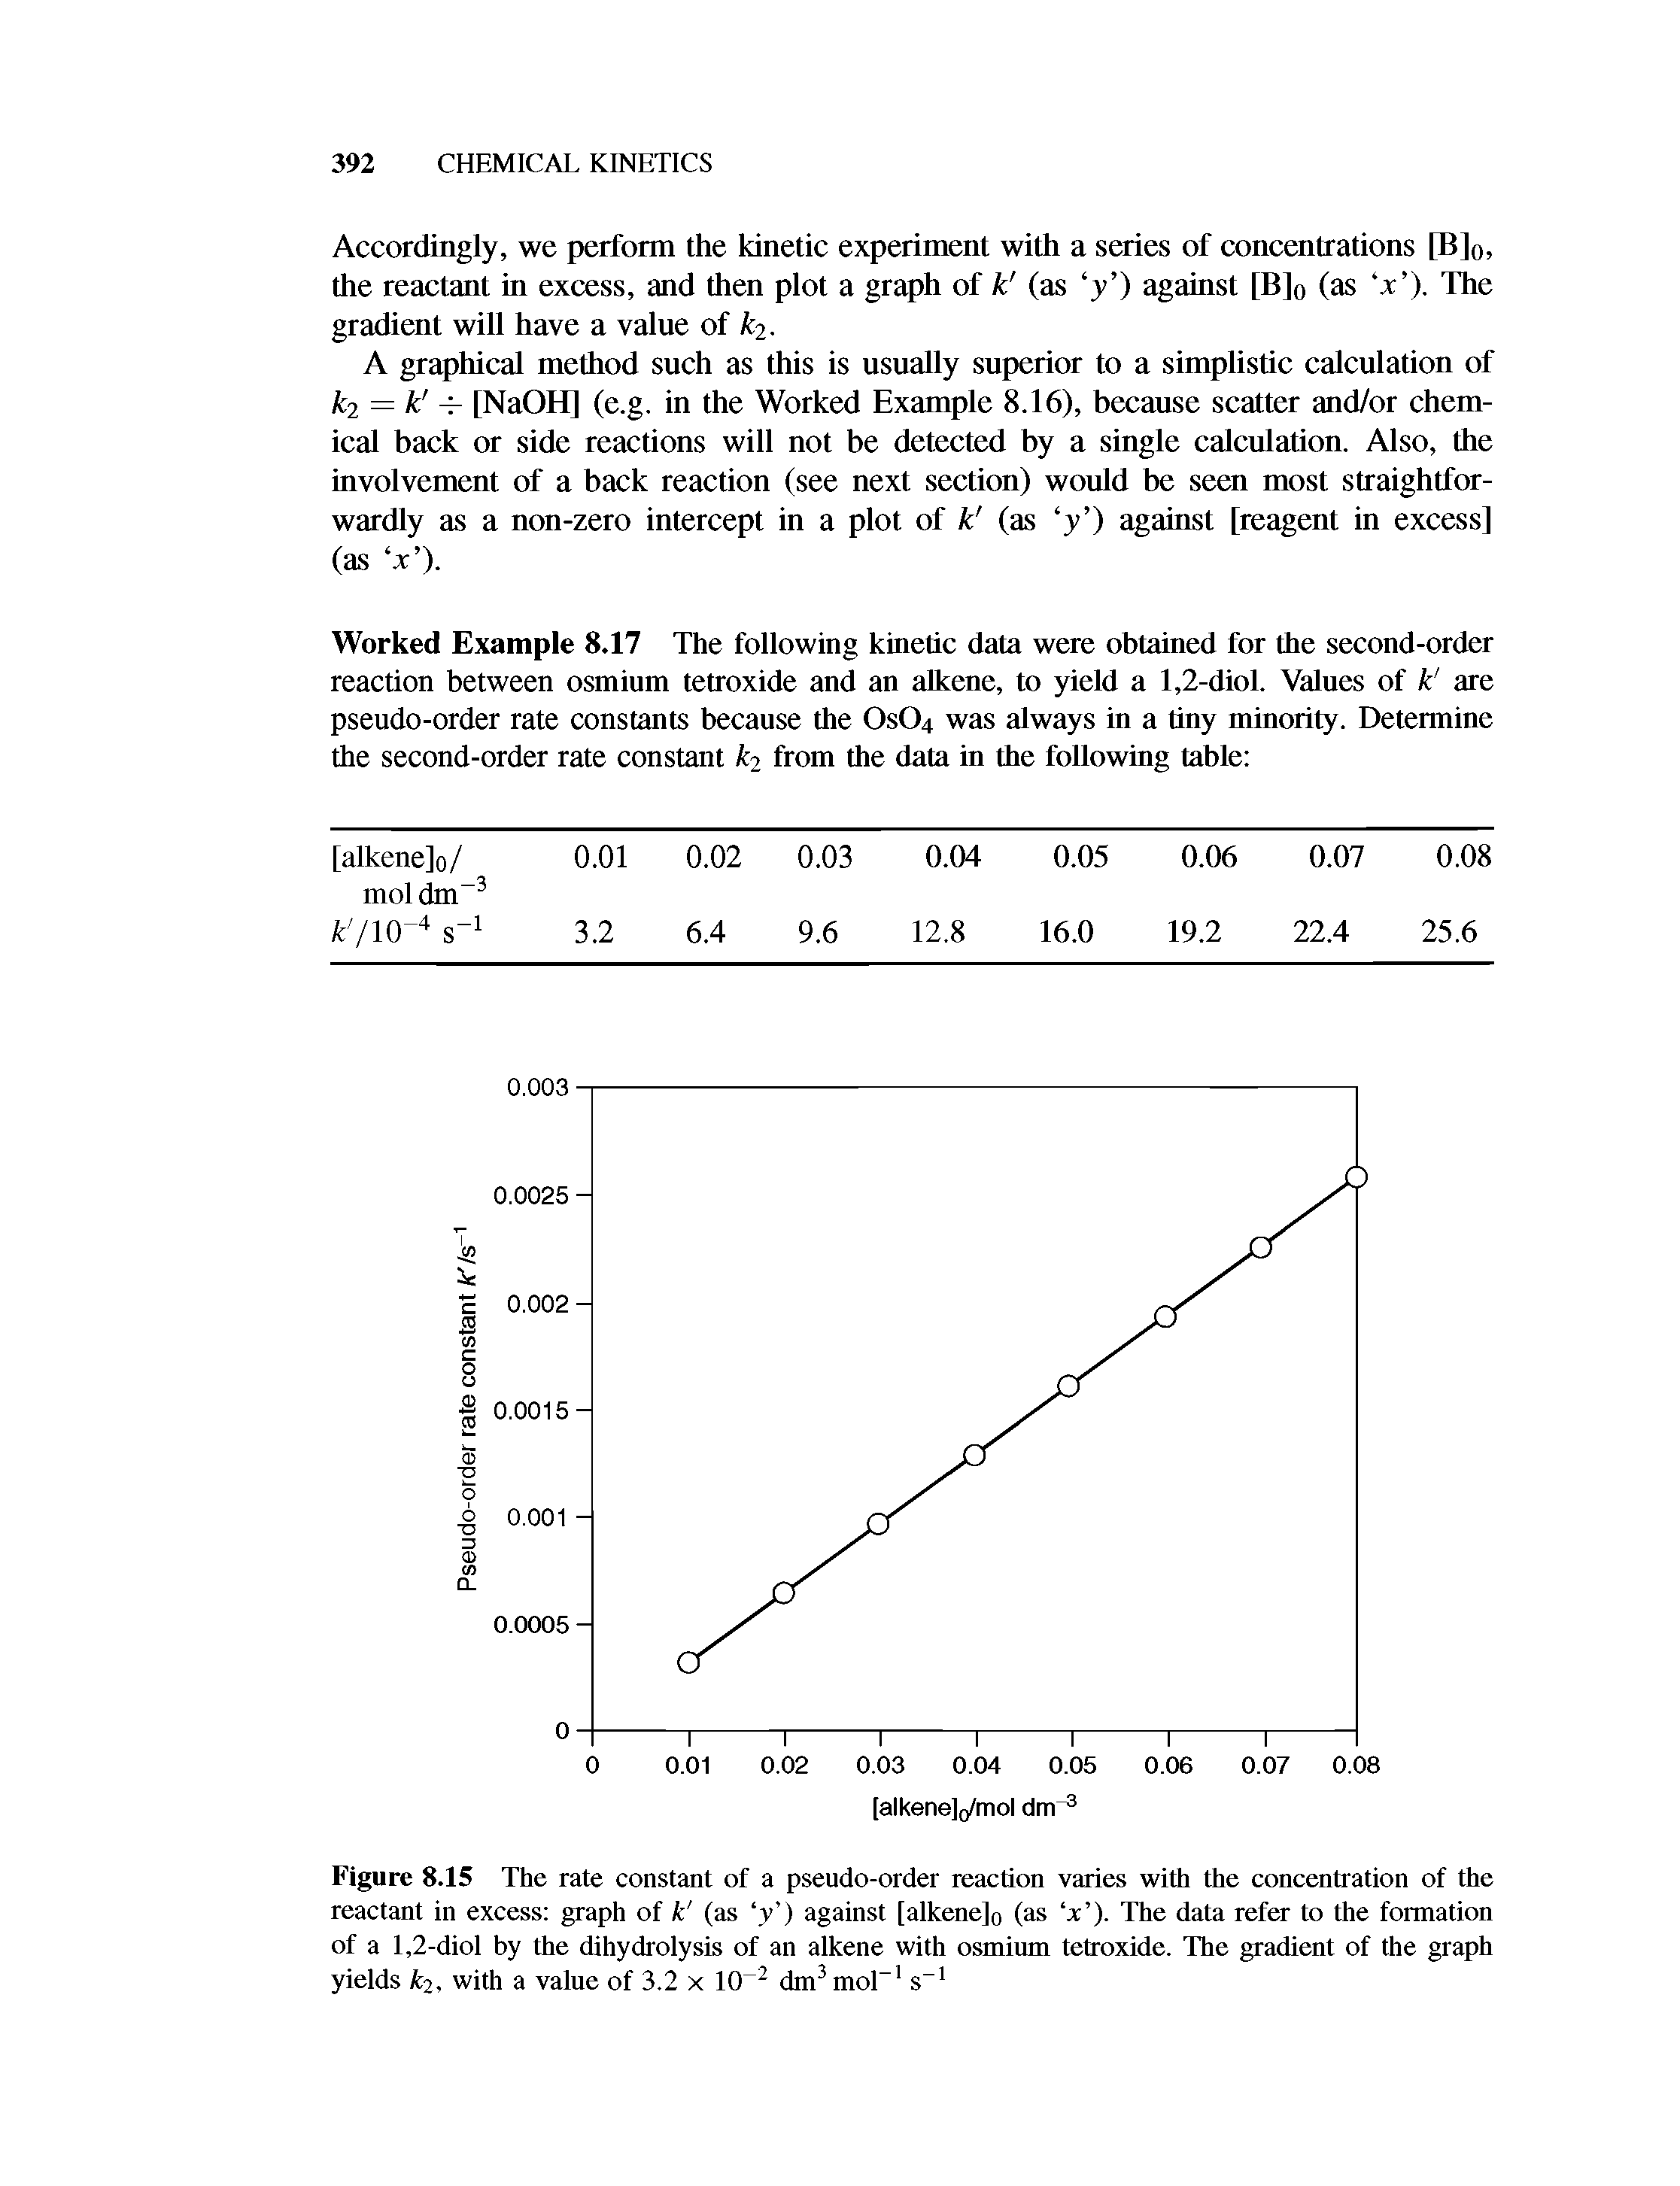 Figure 8.15 The rate constant of a pseudo-order reaction varies with the concentration of the reactant in excess graph of k (as V) against [alkene]0 (as V). The data refer to the formation of a 1,2-diol by the dihydrolysis of an alkene with osmium tetroxide. The gradient of the graph yields k2, with a value of 3.2 x 10 2 dm3 mol-1 s-1...